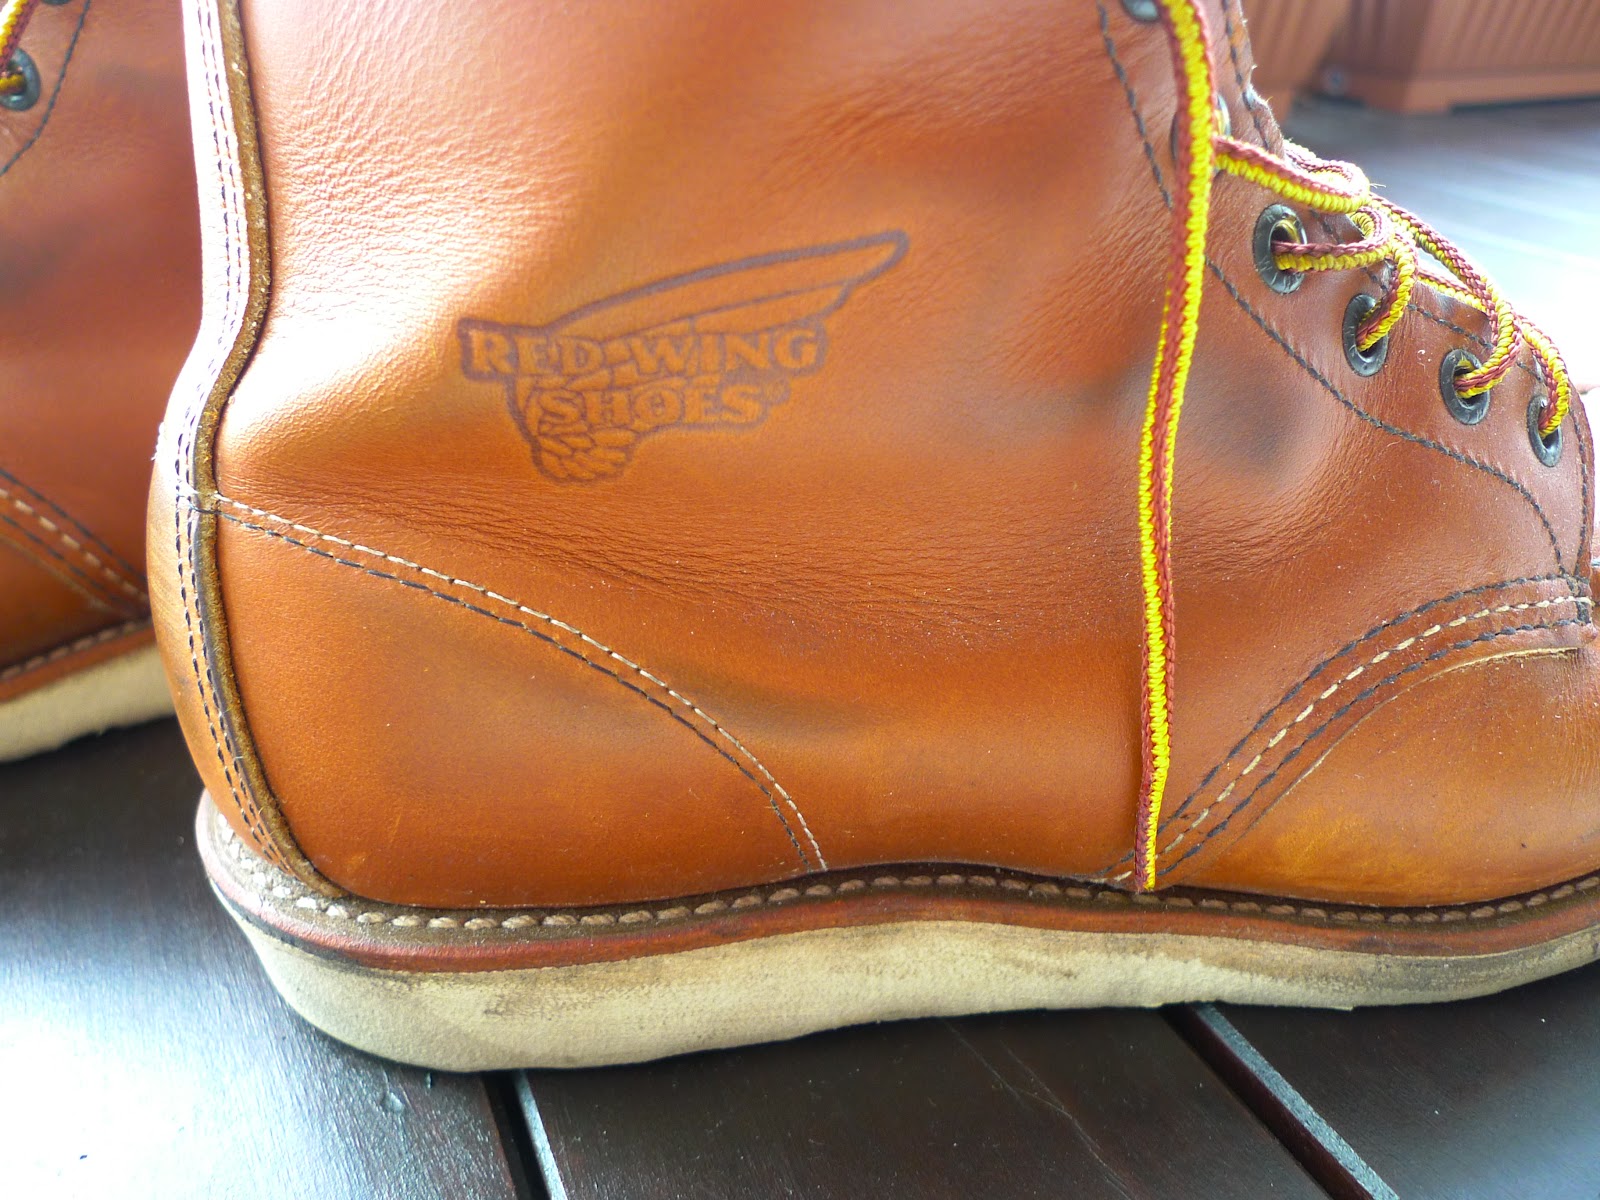 Goody Leathery: Red Wing 875 (after 1 month)